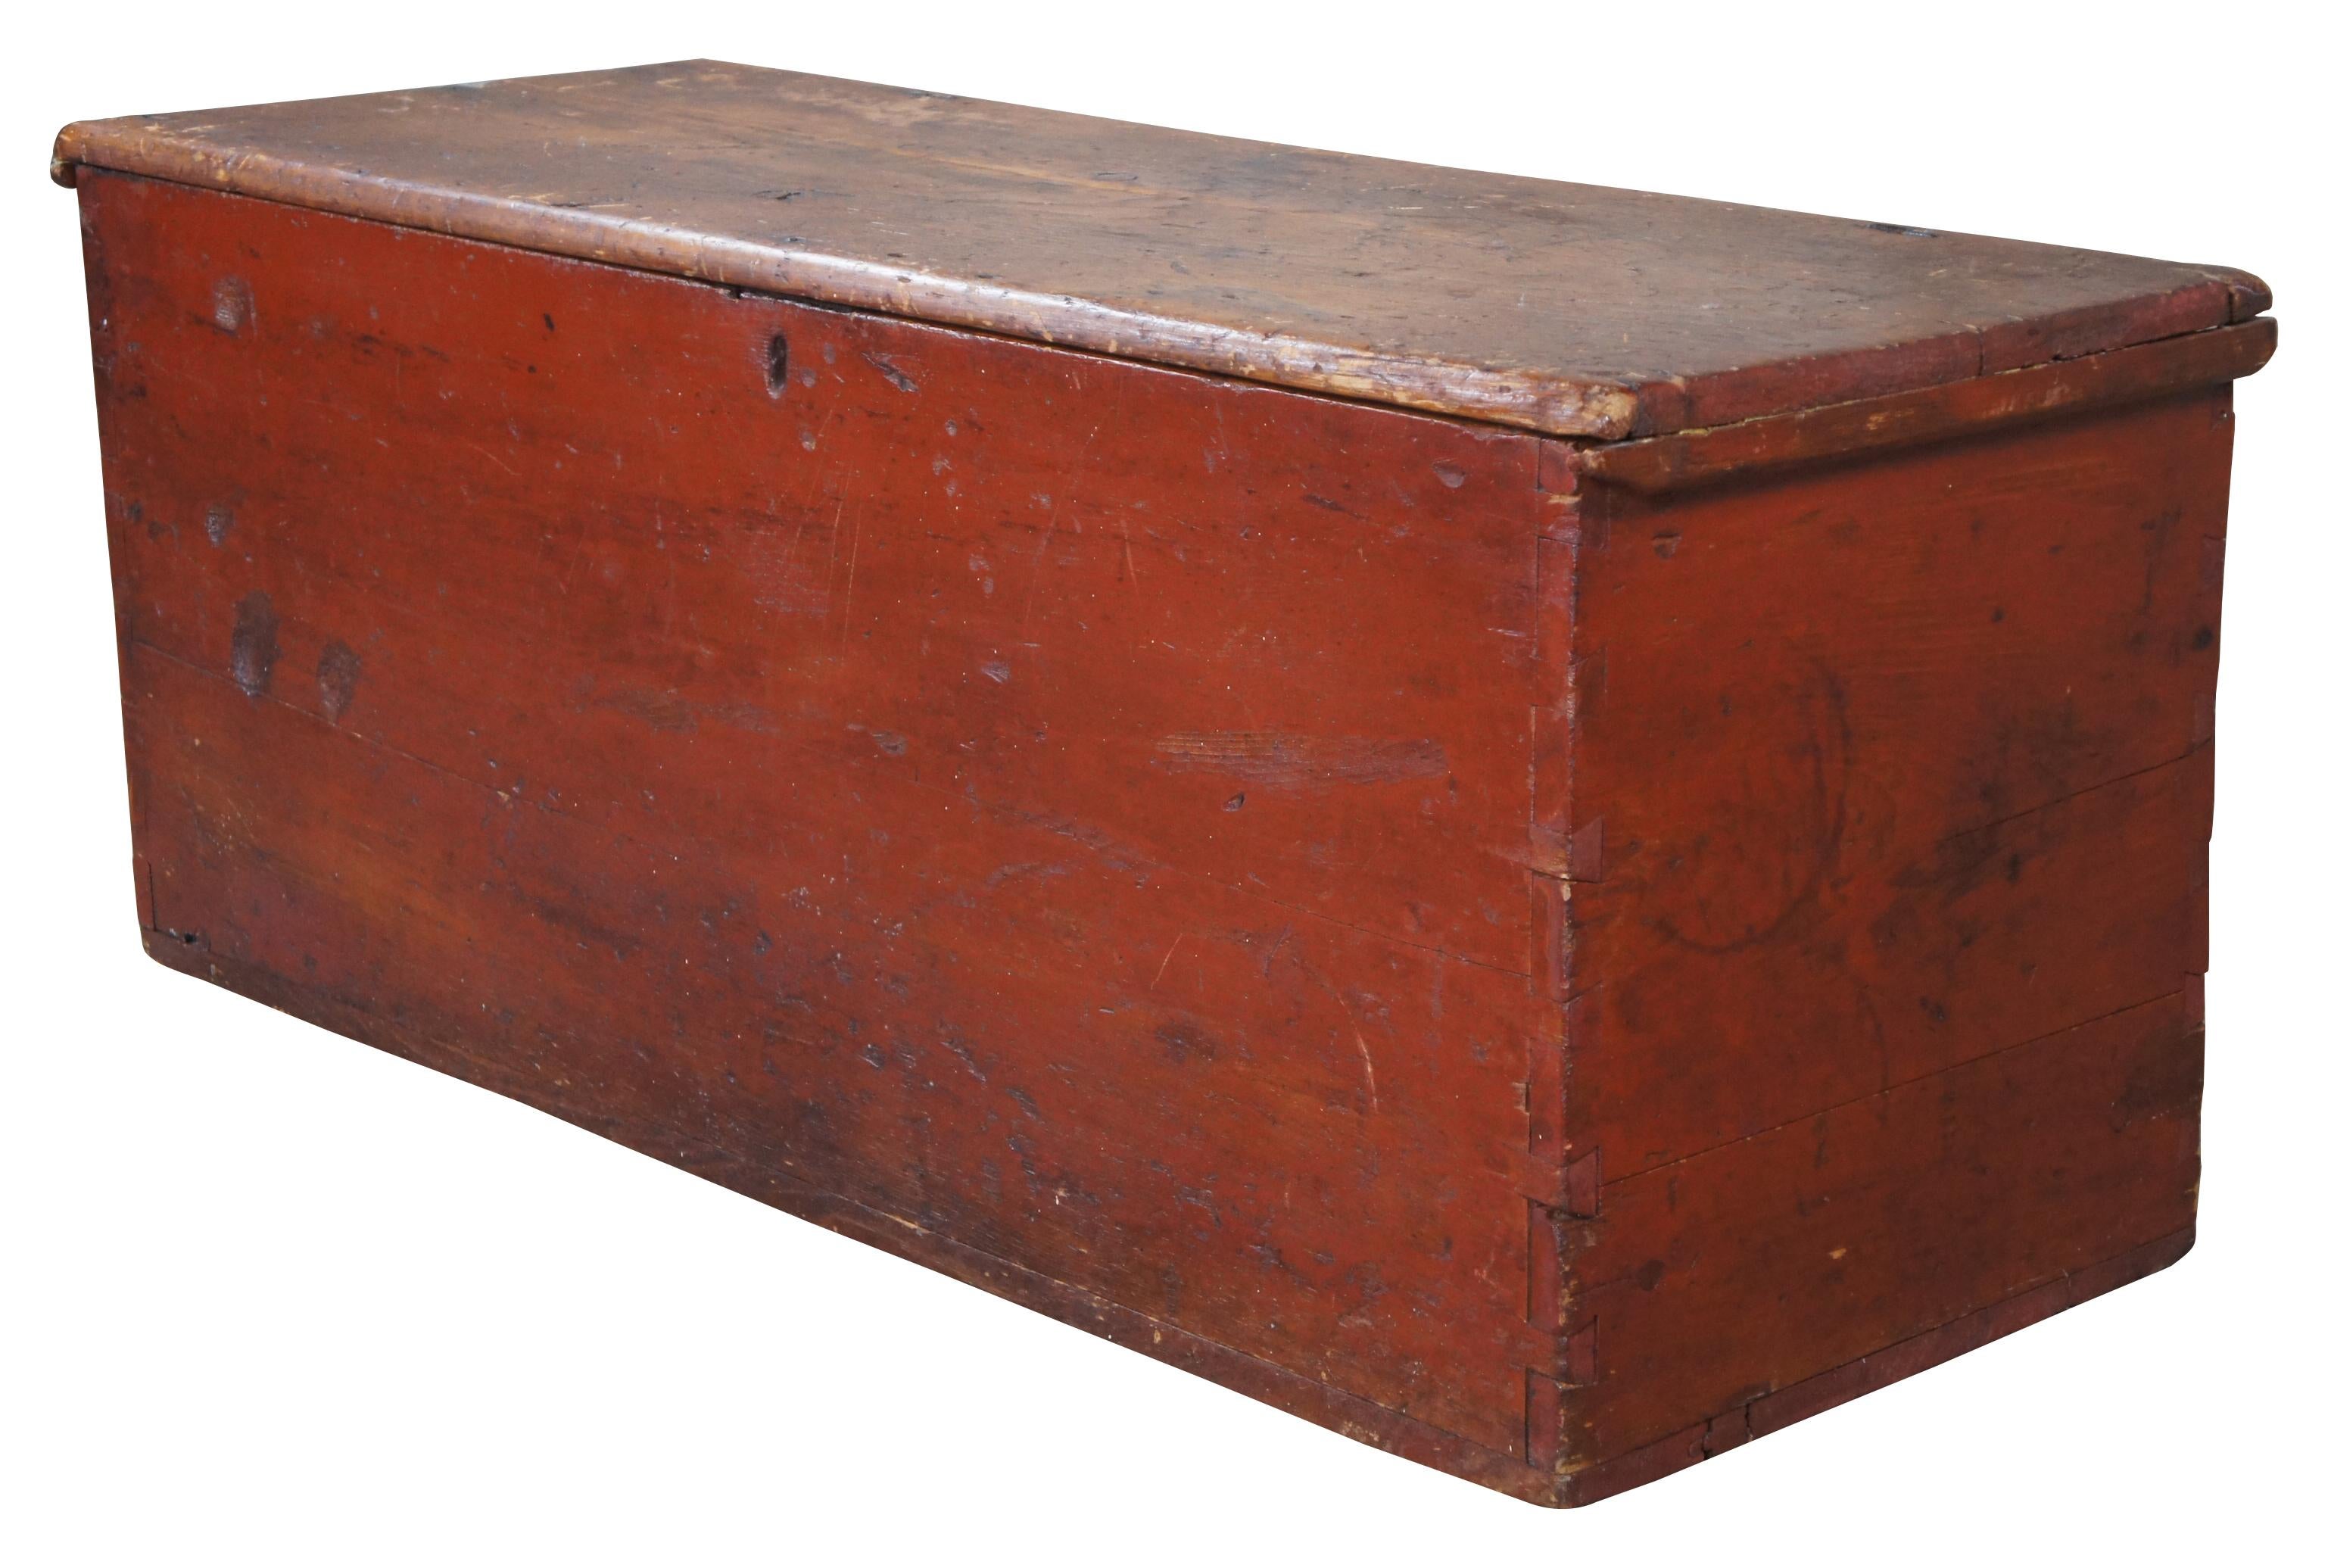 Antique 19th century primitive pine farmhouse blanket / hope chest or toy storage trunk. Made of pine featuring rectangular form painted red exterior, hand dovetailing, forged iron hinges and one interior compartment. Measure: 44